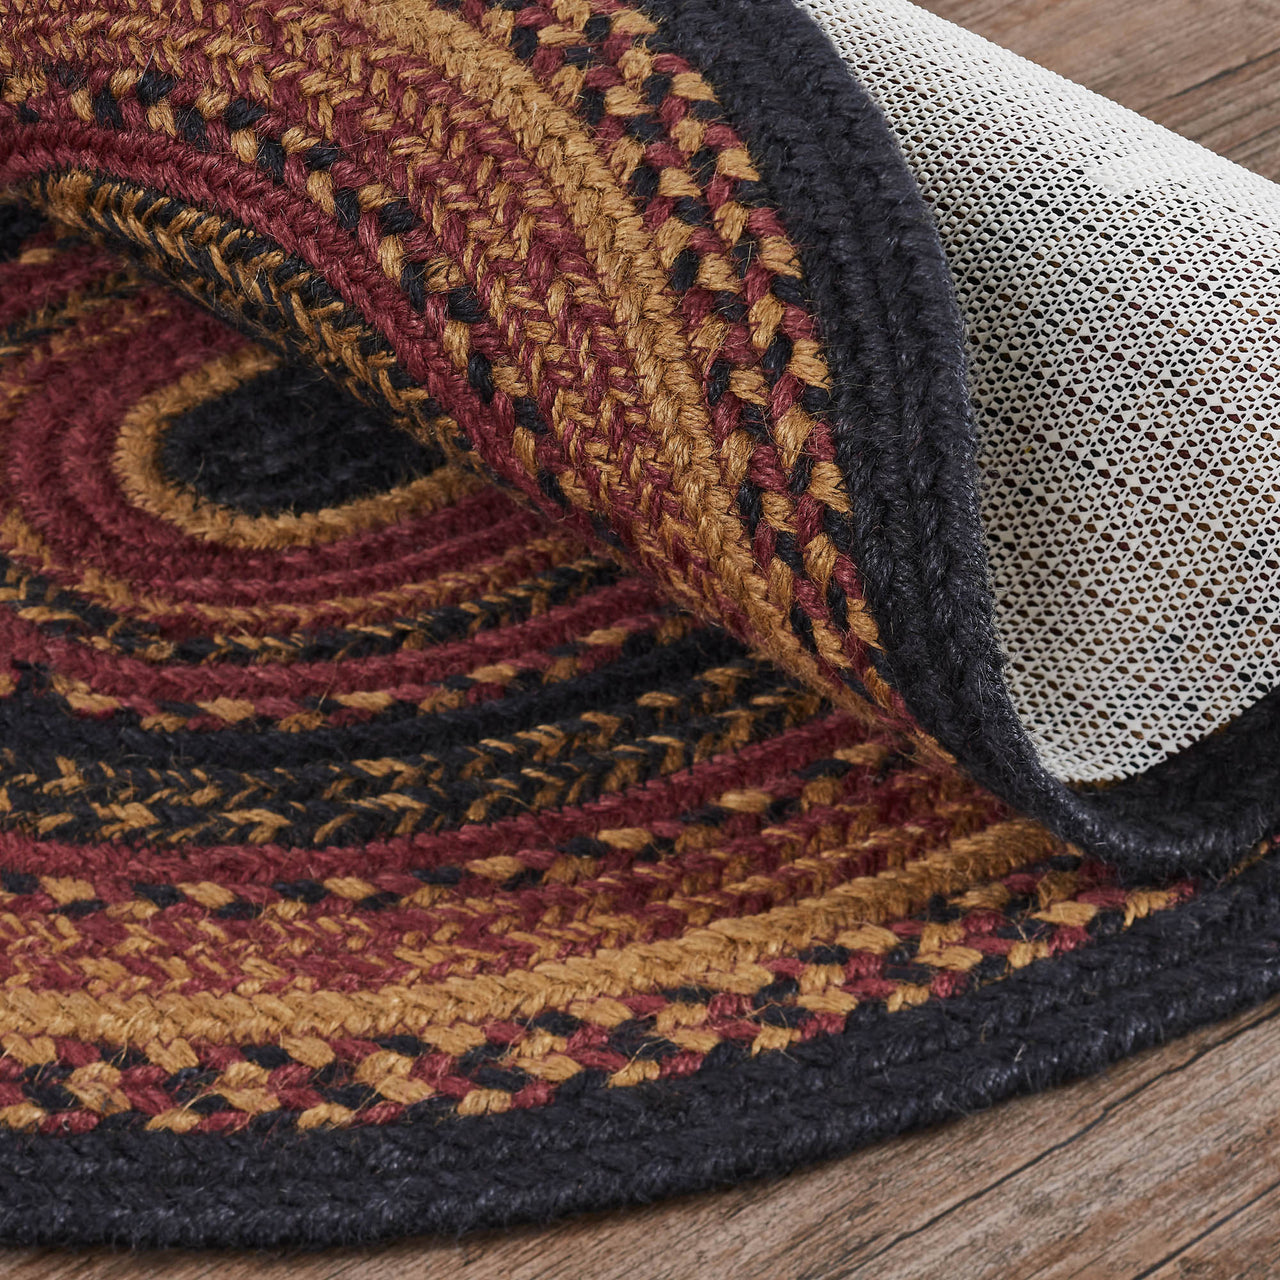 Heritage Farms Jute Braided Rug Oval with Rug Pad 3'x5' VHC Brands